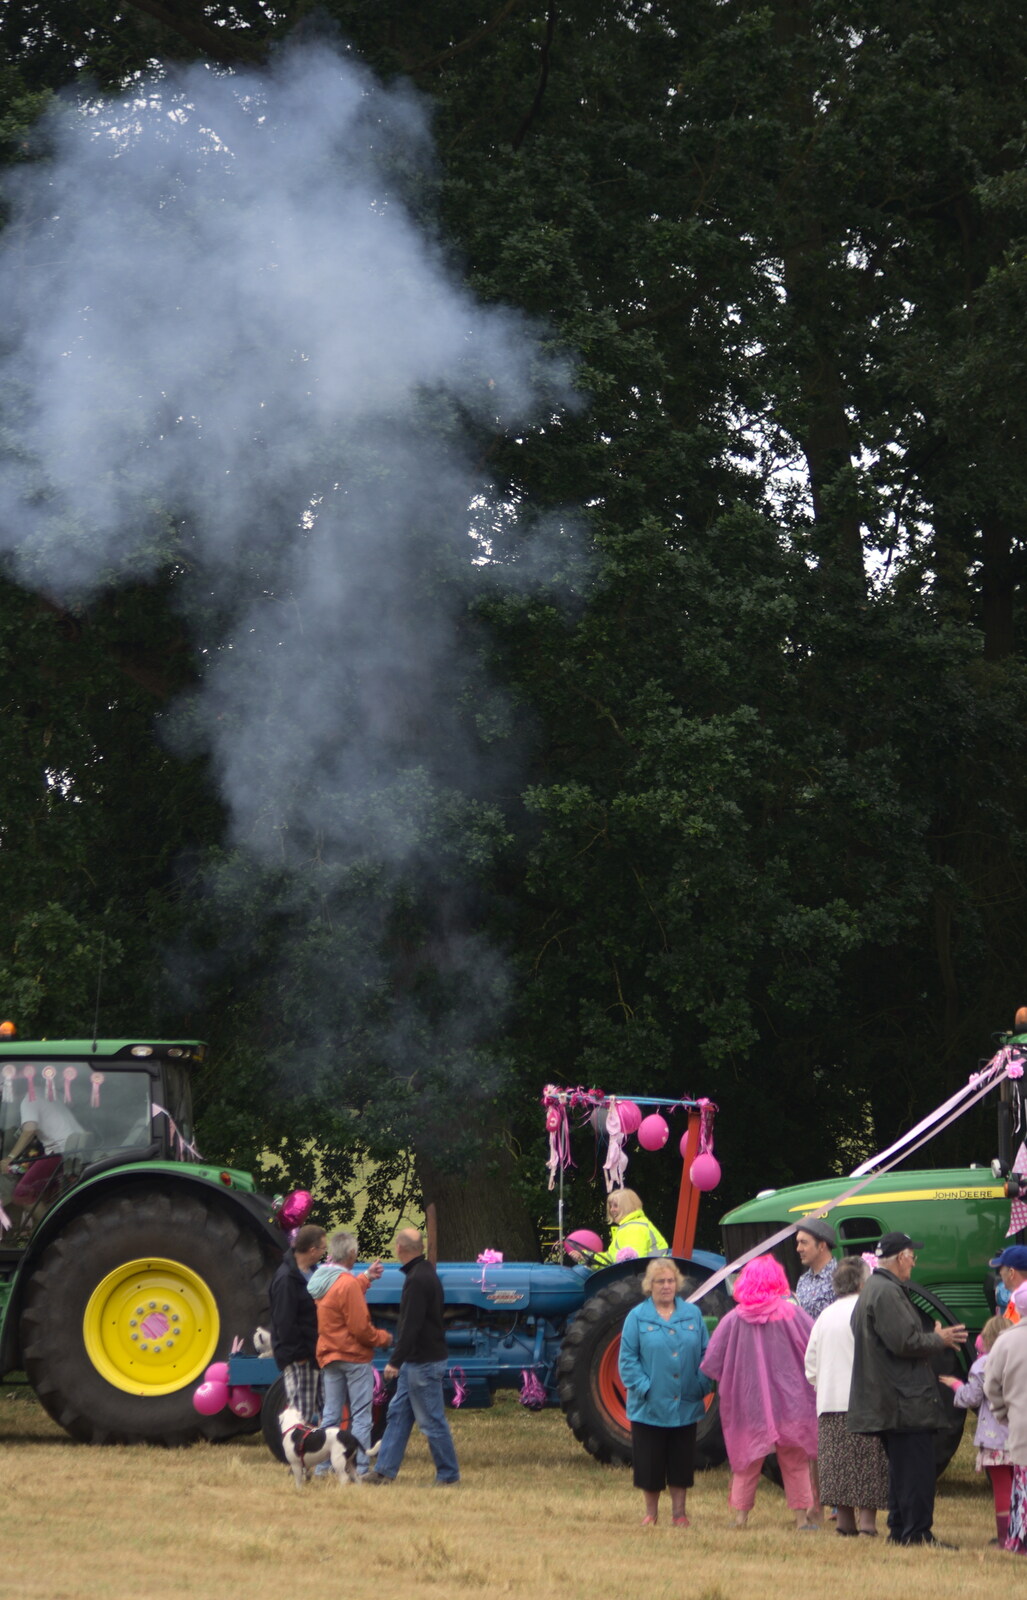 An environmentally-friendly tractor fires up from The Pink Ladies Tractor Run, Harleston and Gawdy Park, Norfolk - 5th July 2015